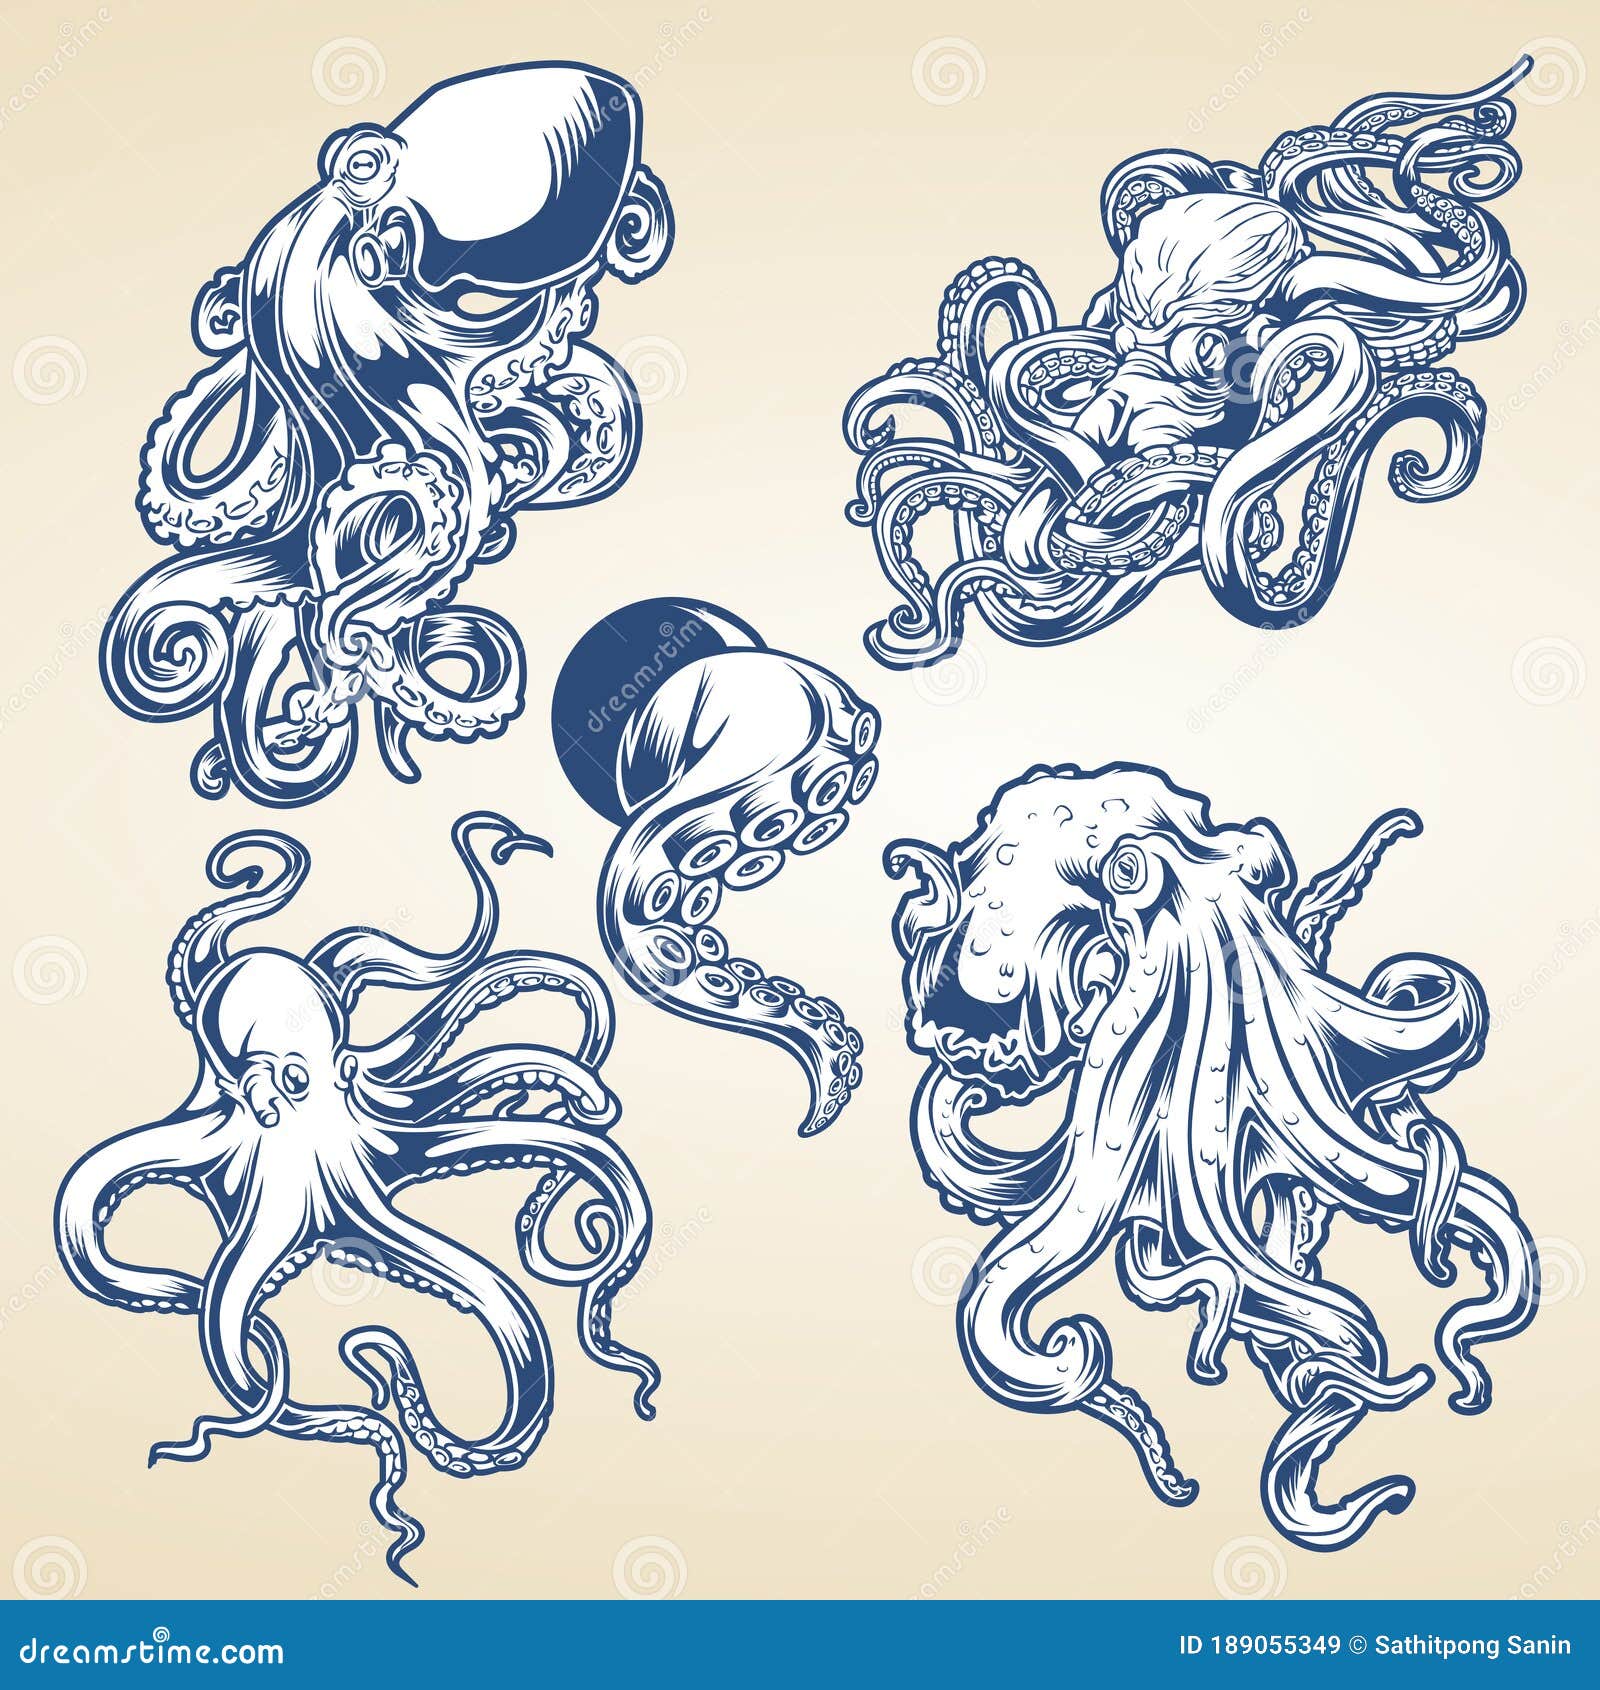 Octopus Tattoo Design and Meaning 95 Ideas